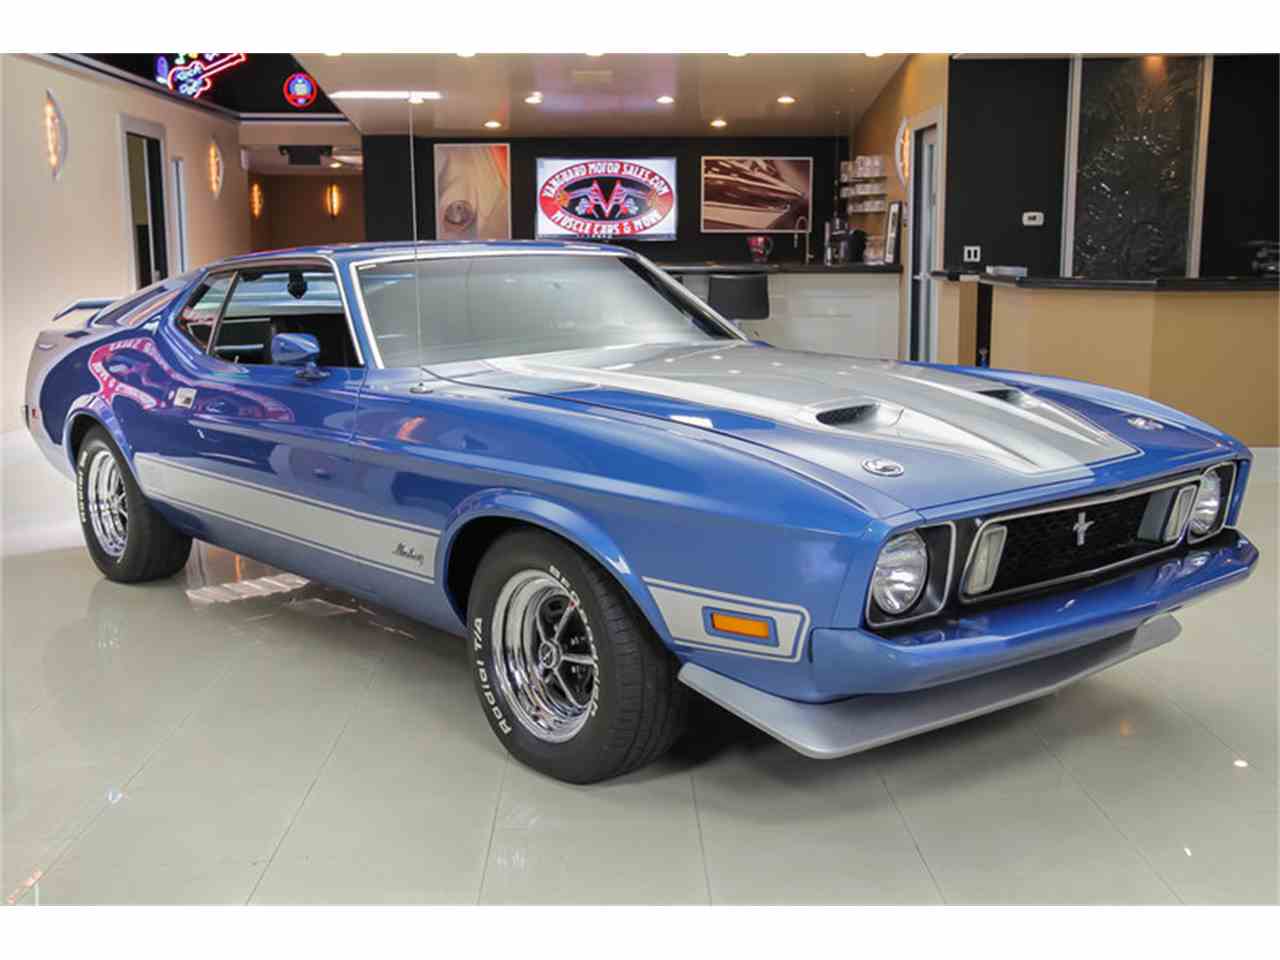 1973 Ford Mustang Mach 1 Q Code for Sale | ClassicCars.com | CC-904501